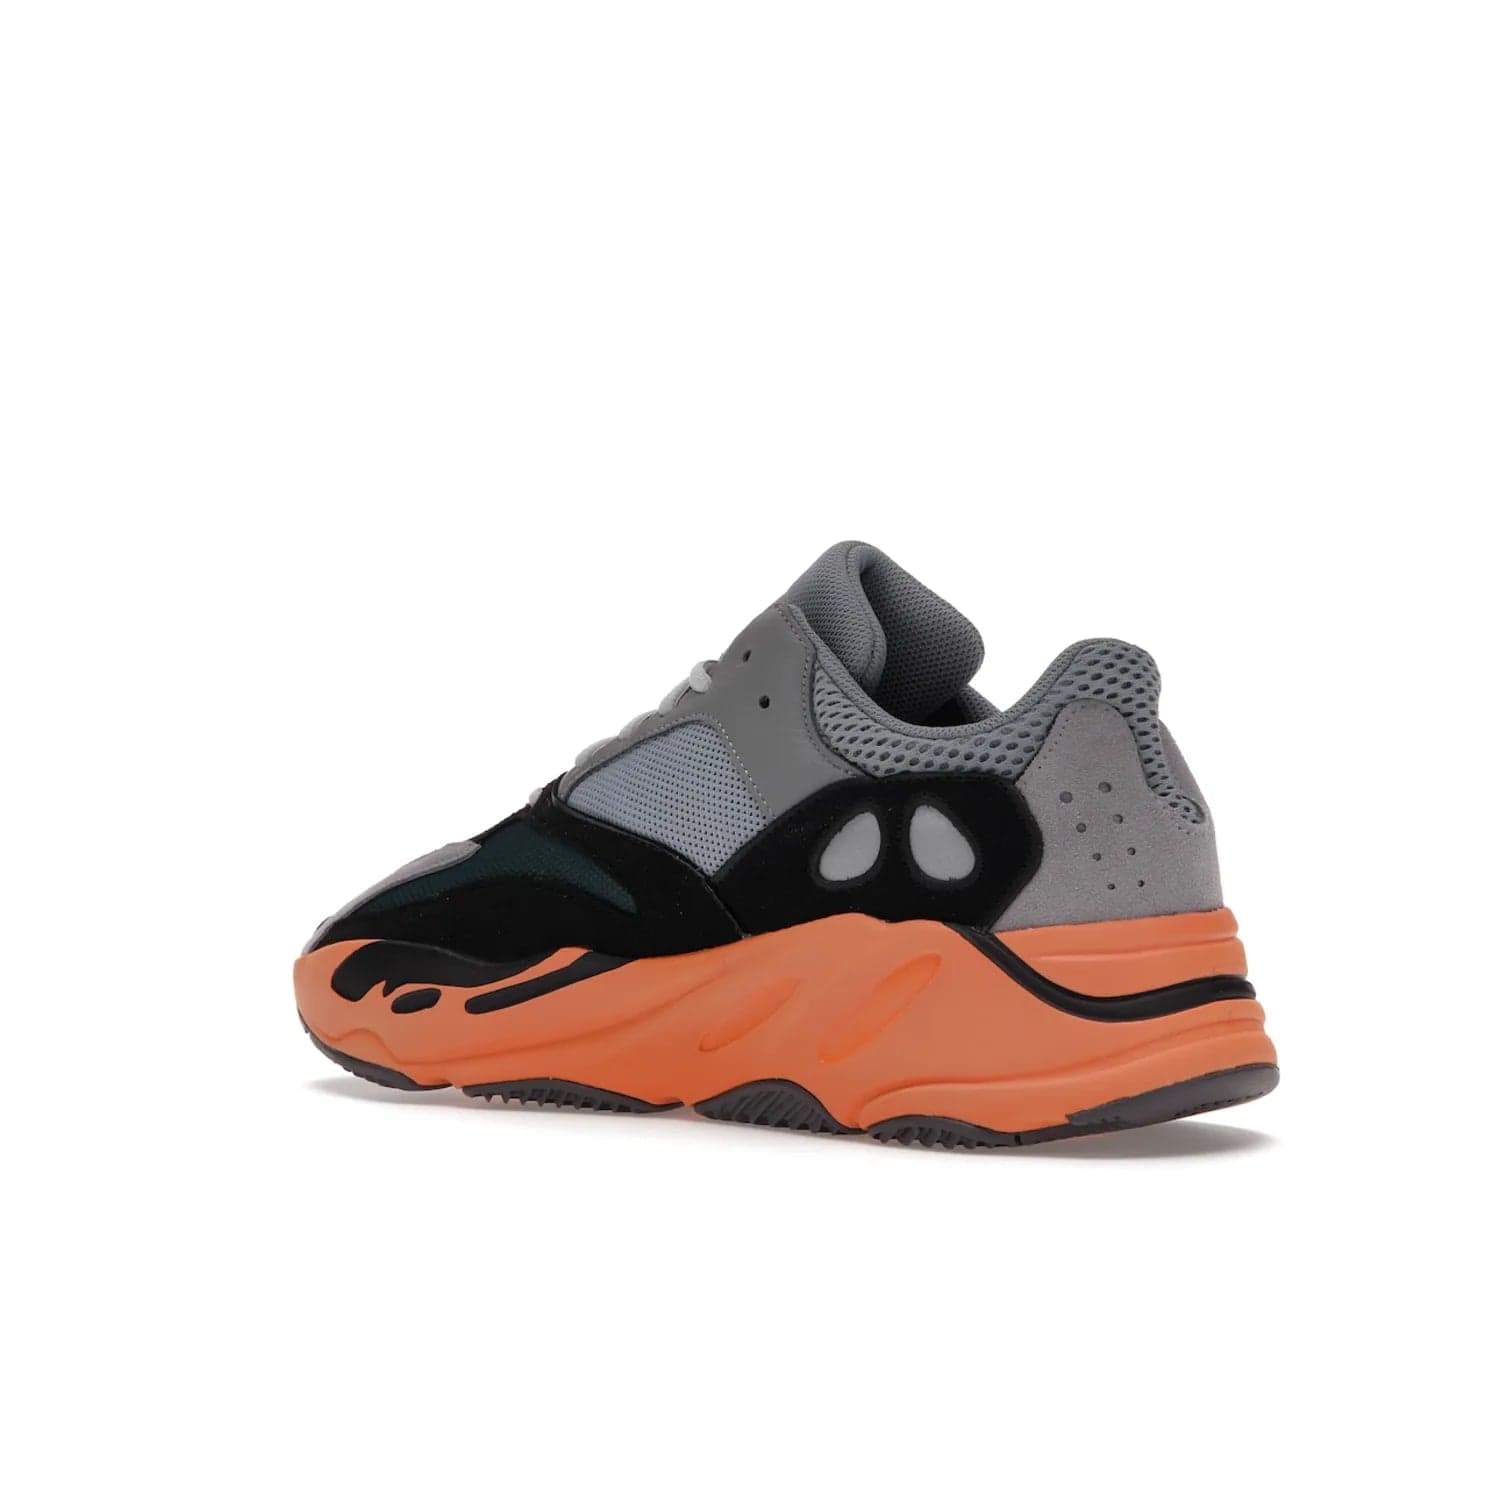 adidas Yeezy Boost 700 Wash Orange - Image 23 - Only at www.BallersClubKickz.com - Introducing the adidas Yeezy Boost 700 Wash Orange. Unique grey leather, suede, mesh upper and teal panels with a chunky Wash Orange Boost midsole. Release October 2021, make a statement today!